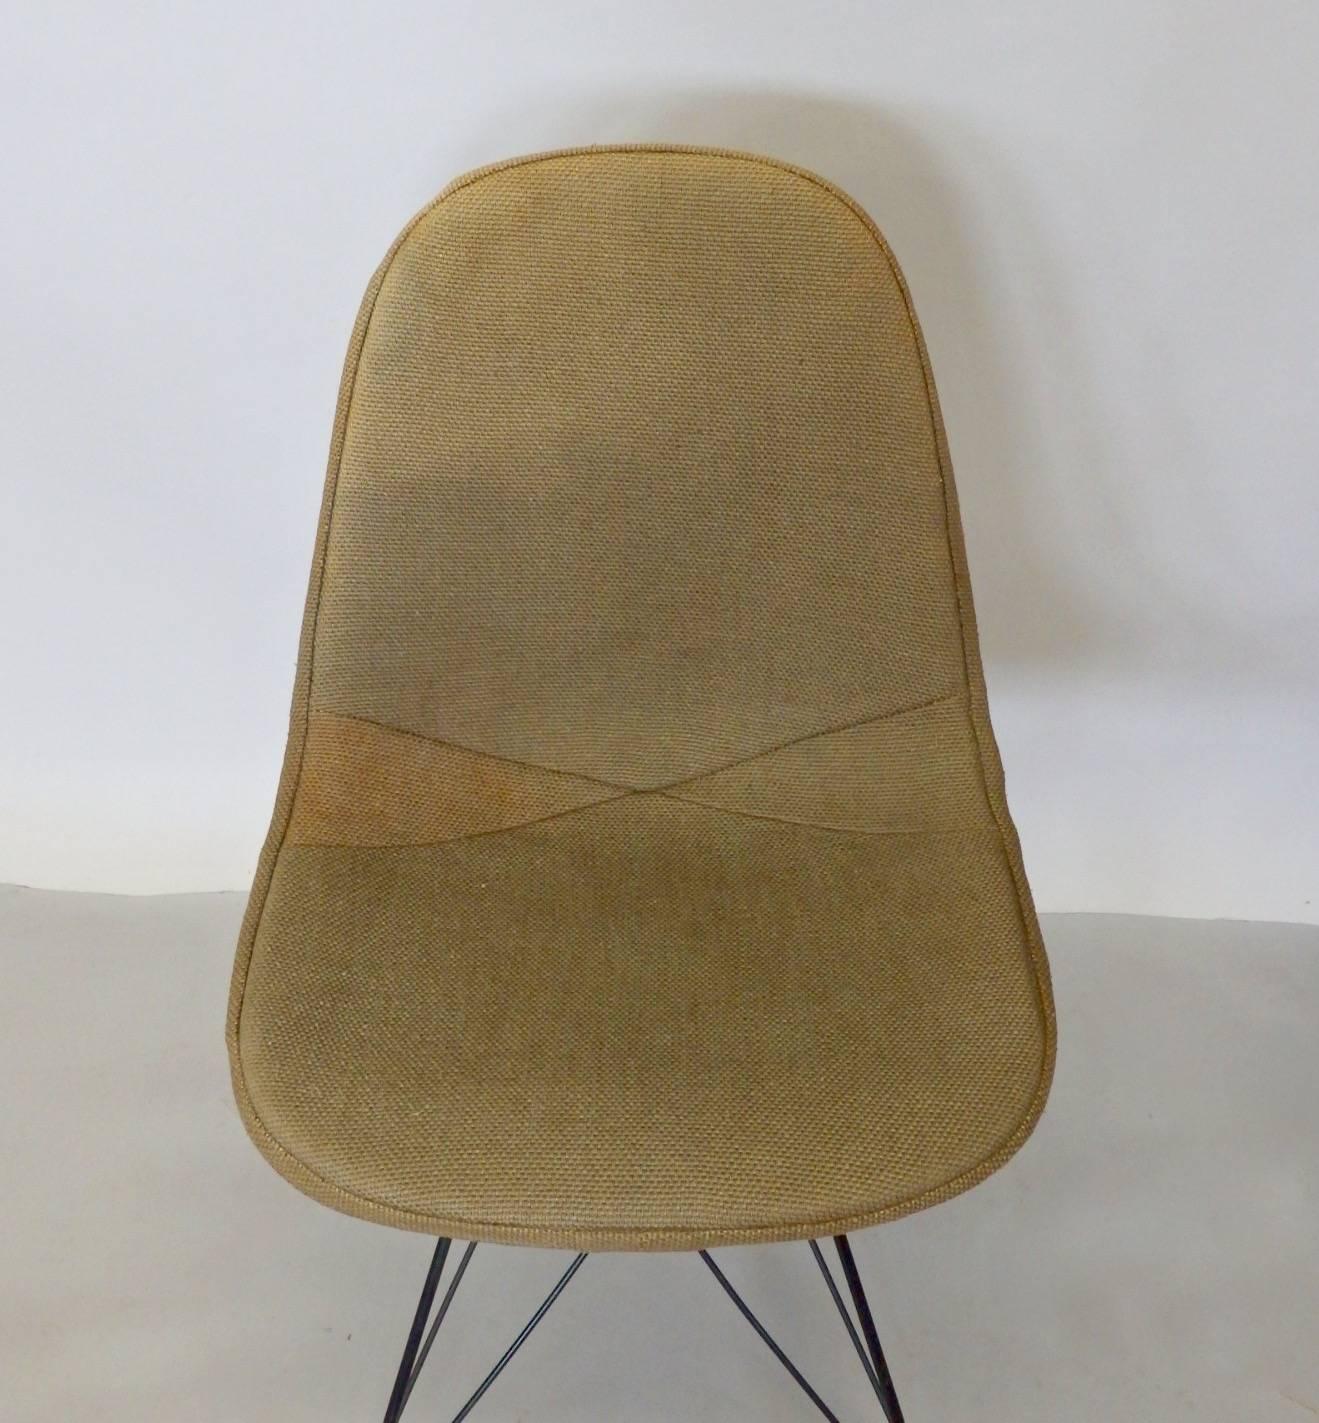 Welded Pair of Early Eames Herman Miller DKR Chairs on Eiffel Tower Bases With Covers For Sale